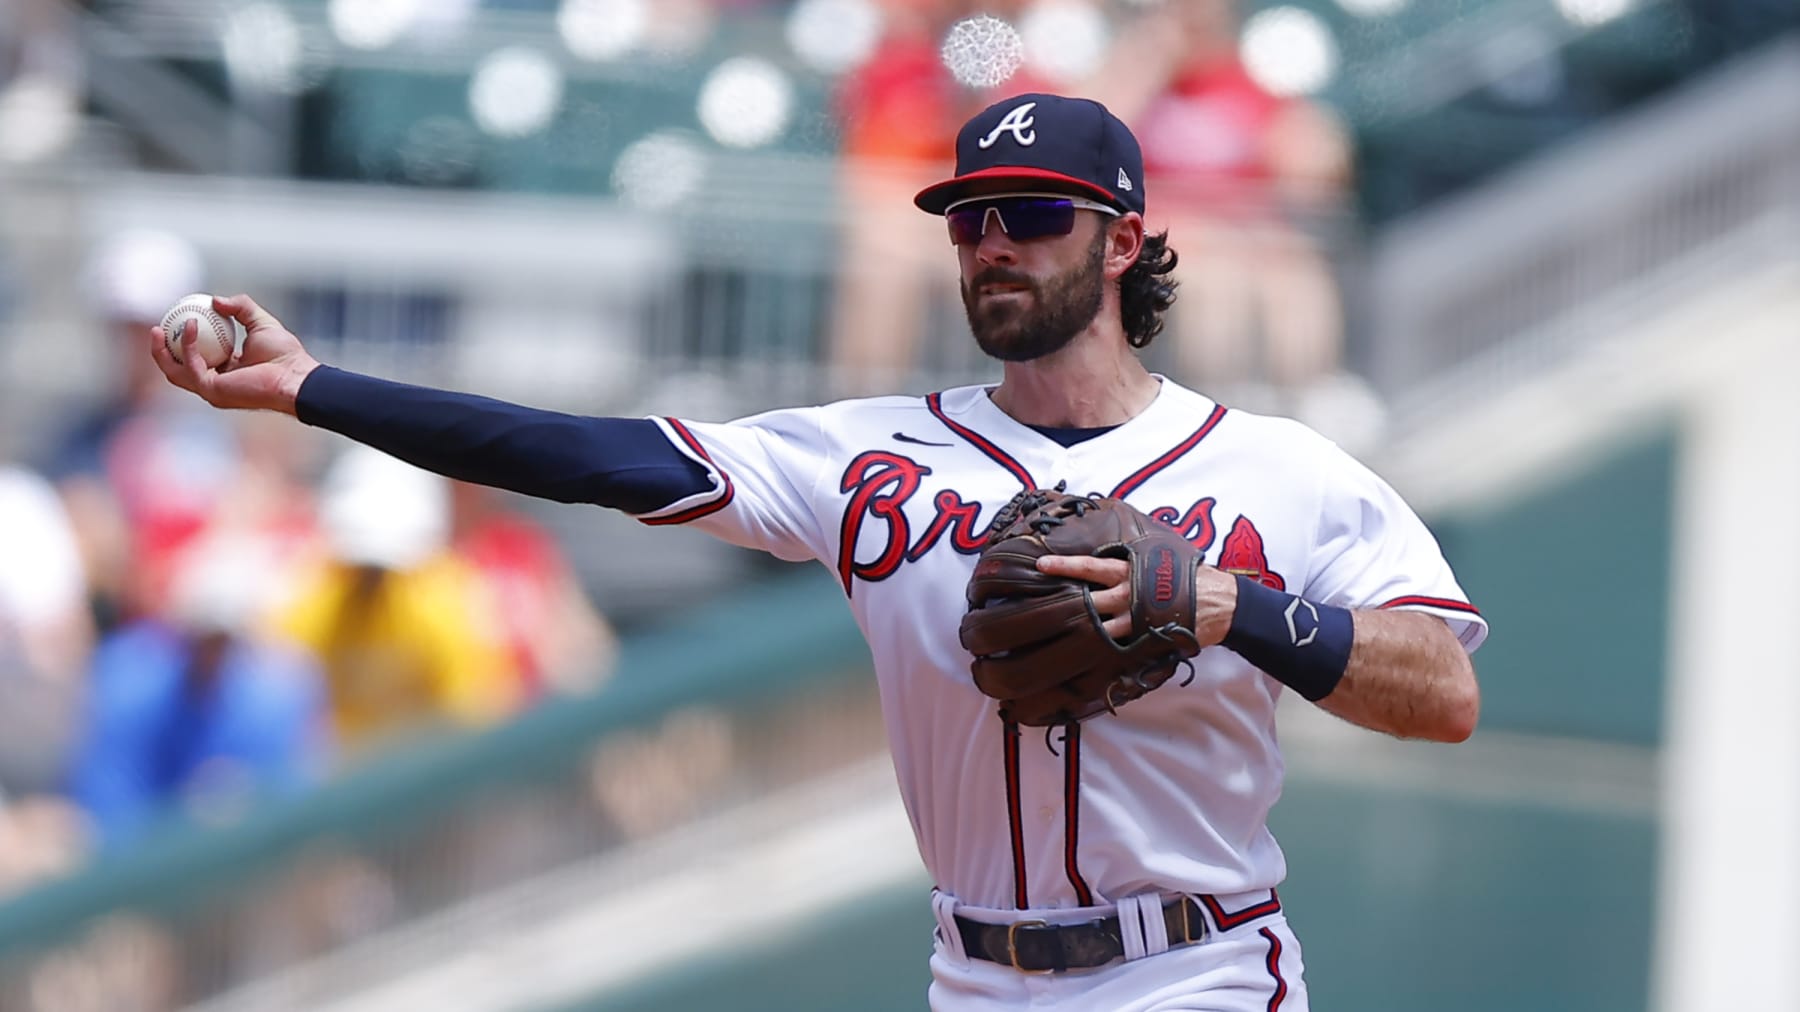 Rumor: Red Sox eyeing ex-Braves slugger for outfield help